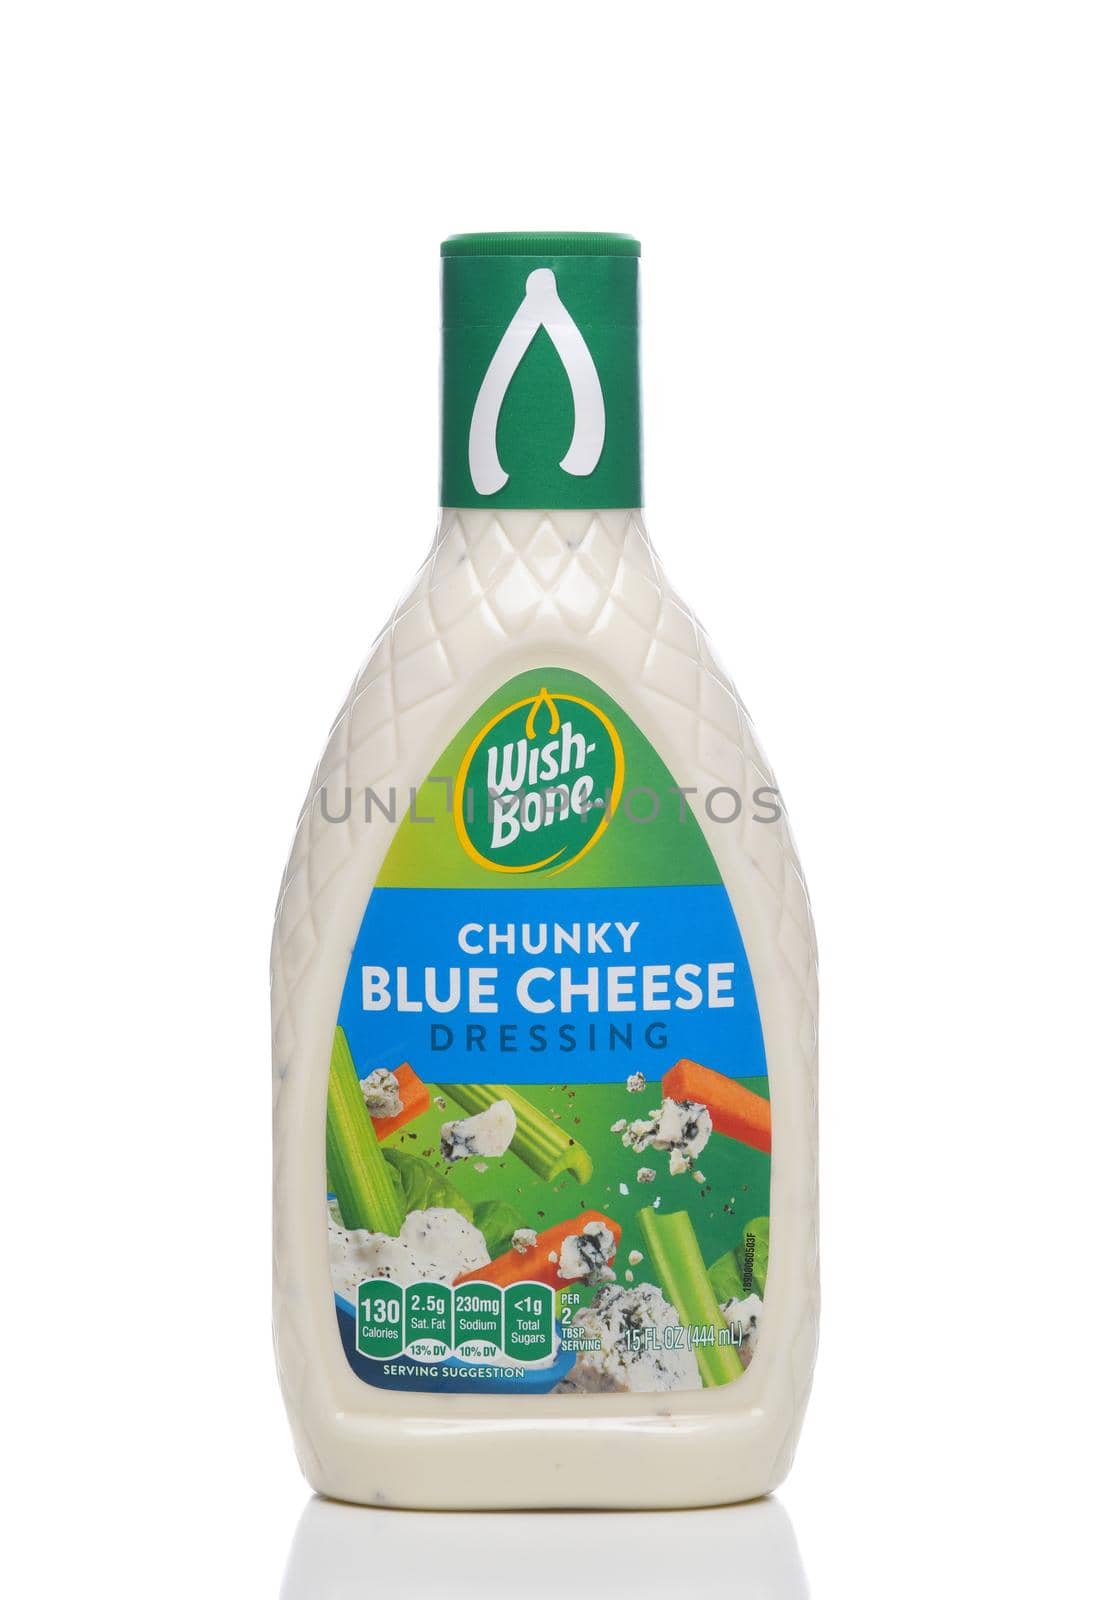 IRVINE, CALIFORNIA - 16 MAY 2020: A bottle of Wishbone Chunky Blue Cheese Dressing.